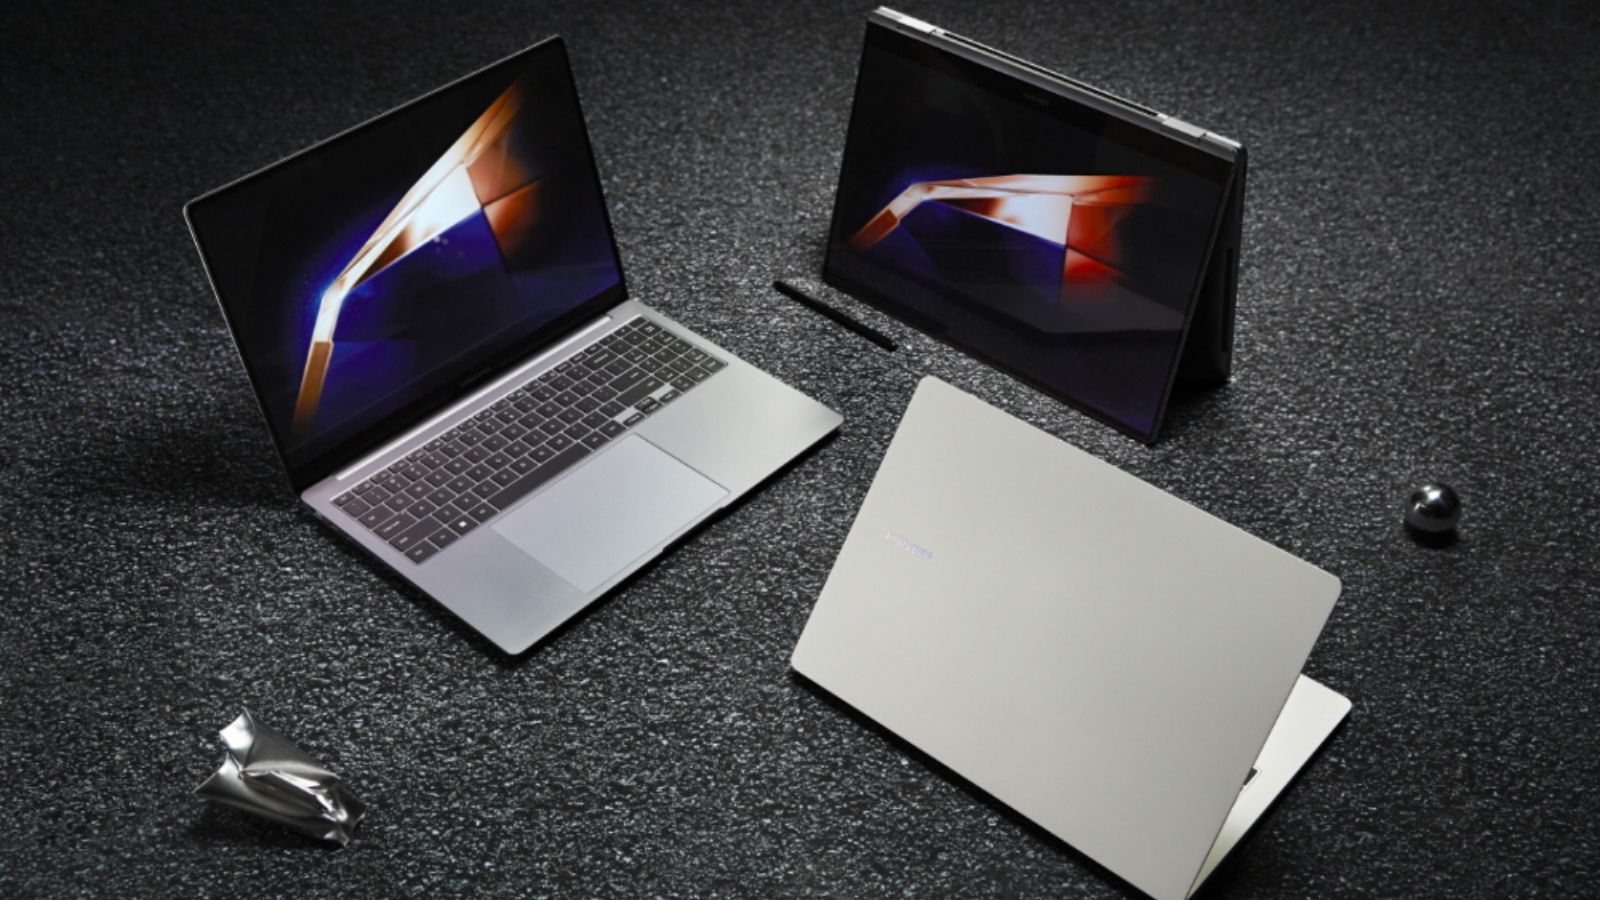 three laptops from the samsung galaxy book4 series on a gritty gray surface next to two pieces of metal